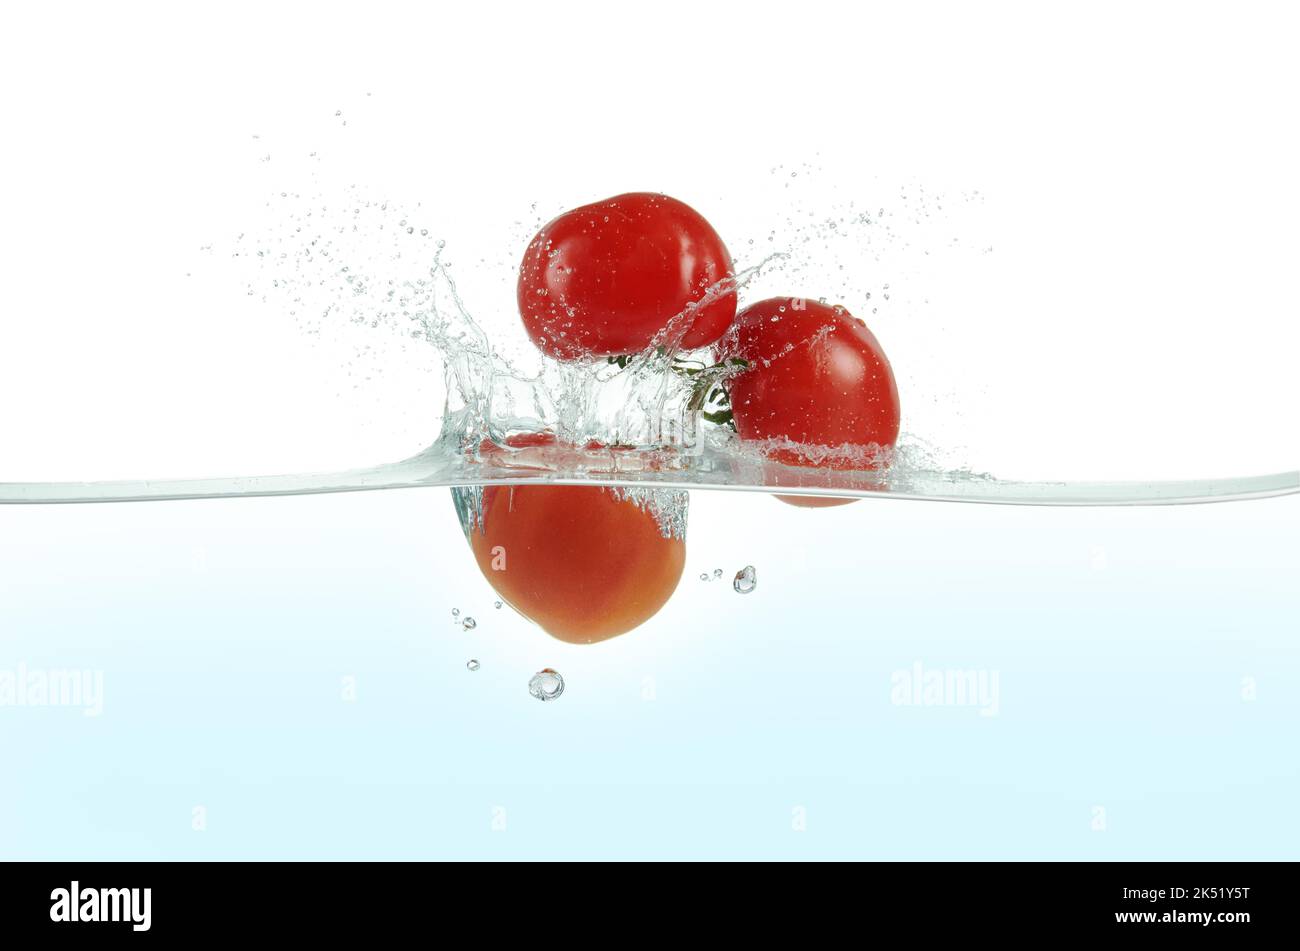 Three tomatoes splashing in water. Side view on white background. Stock Photo